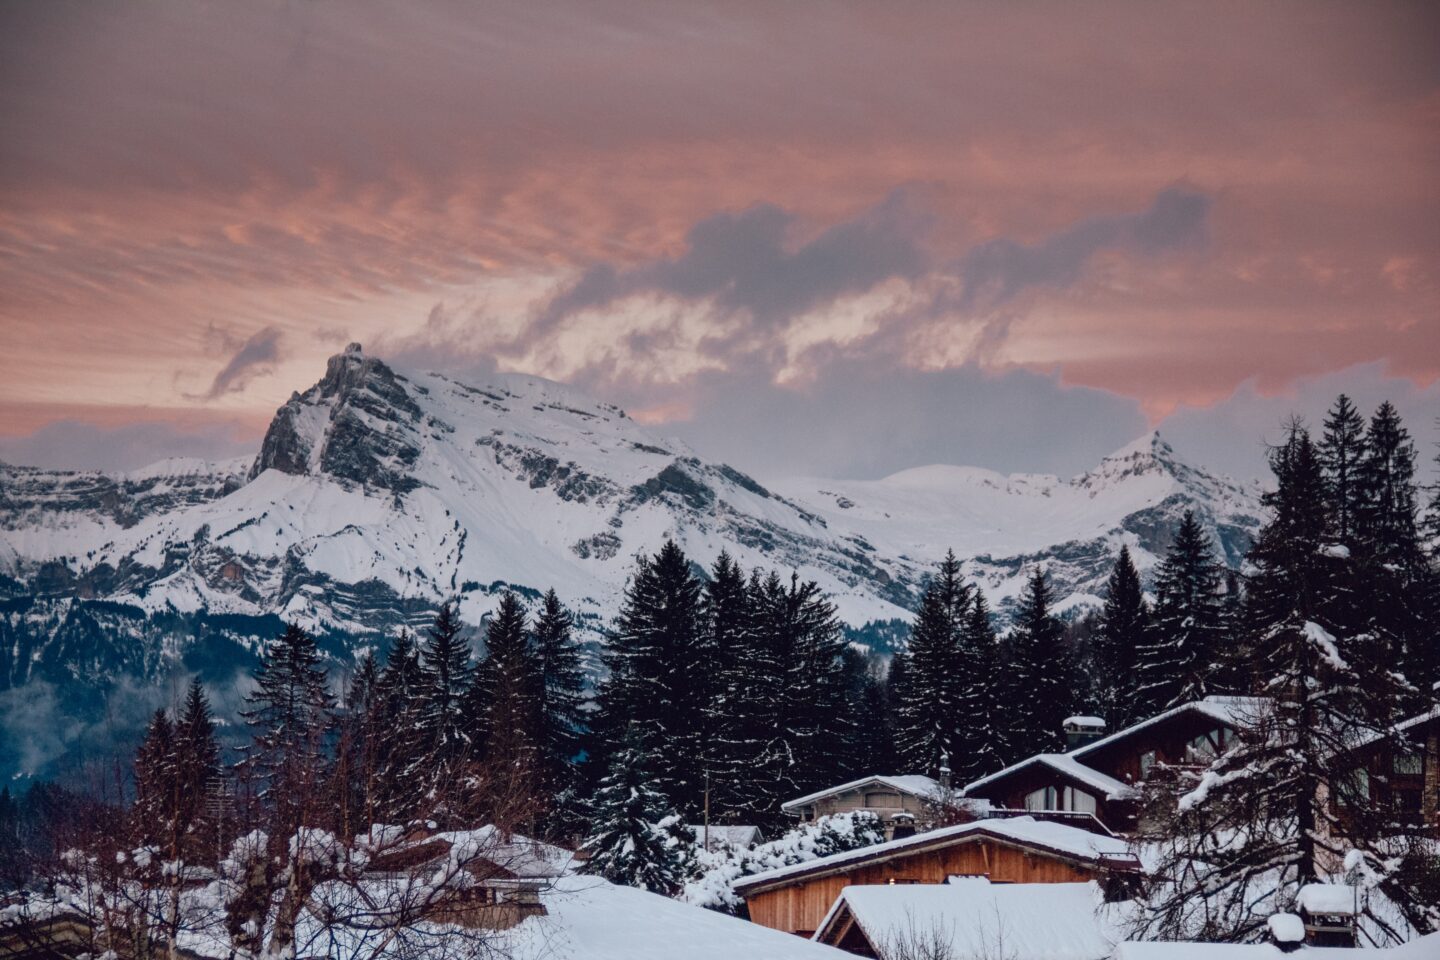 ski tow in europe pink sky sunset over mountain town covered in snow with mountains and trees in Megève france